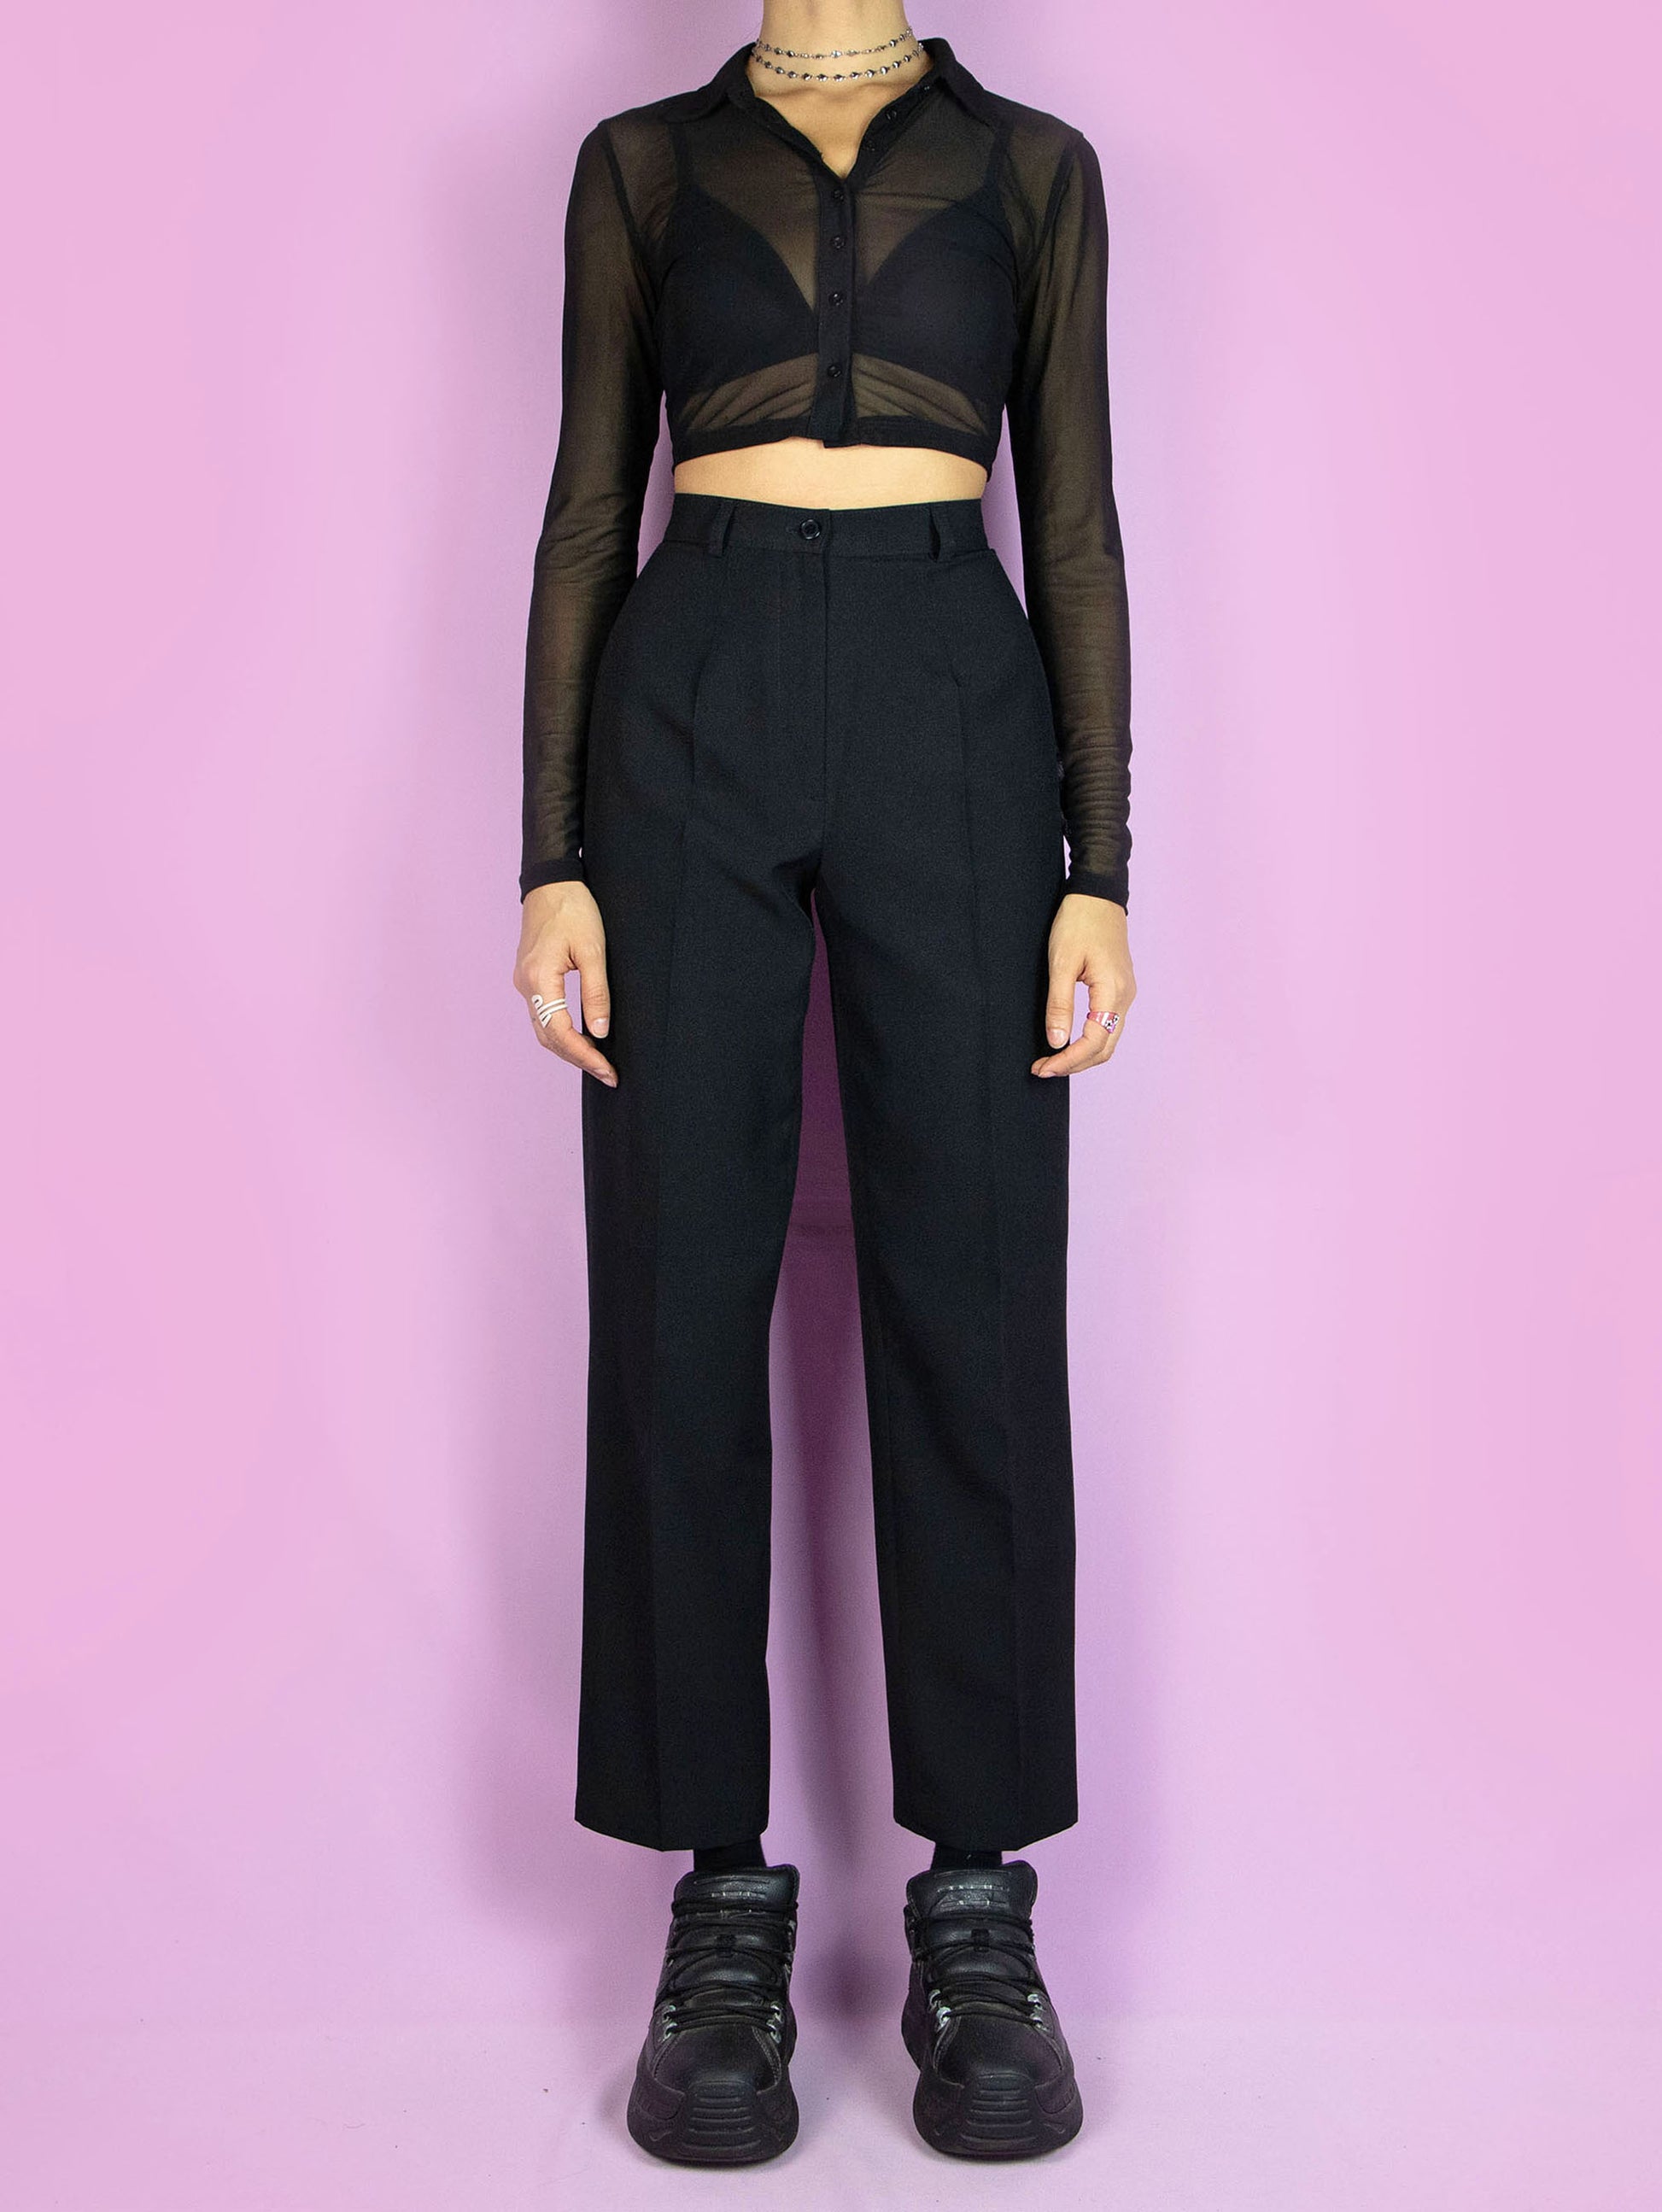 The Vintage 90s Black Pleated Trousers are high-waisted black pants with pleats and a front zipper closure. Elegant classic tailored 1990s office pleated tapered trousers.